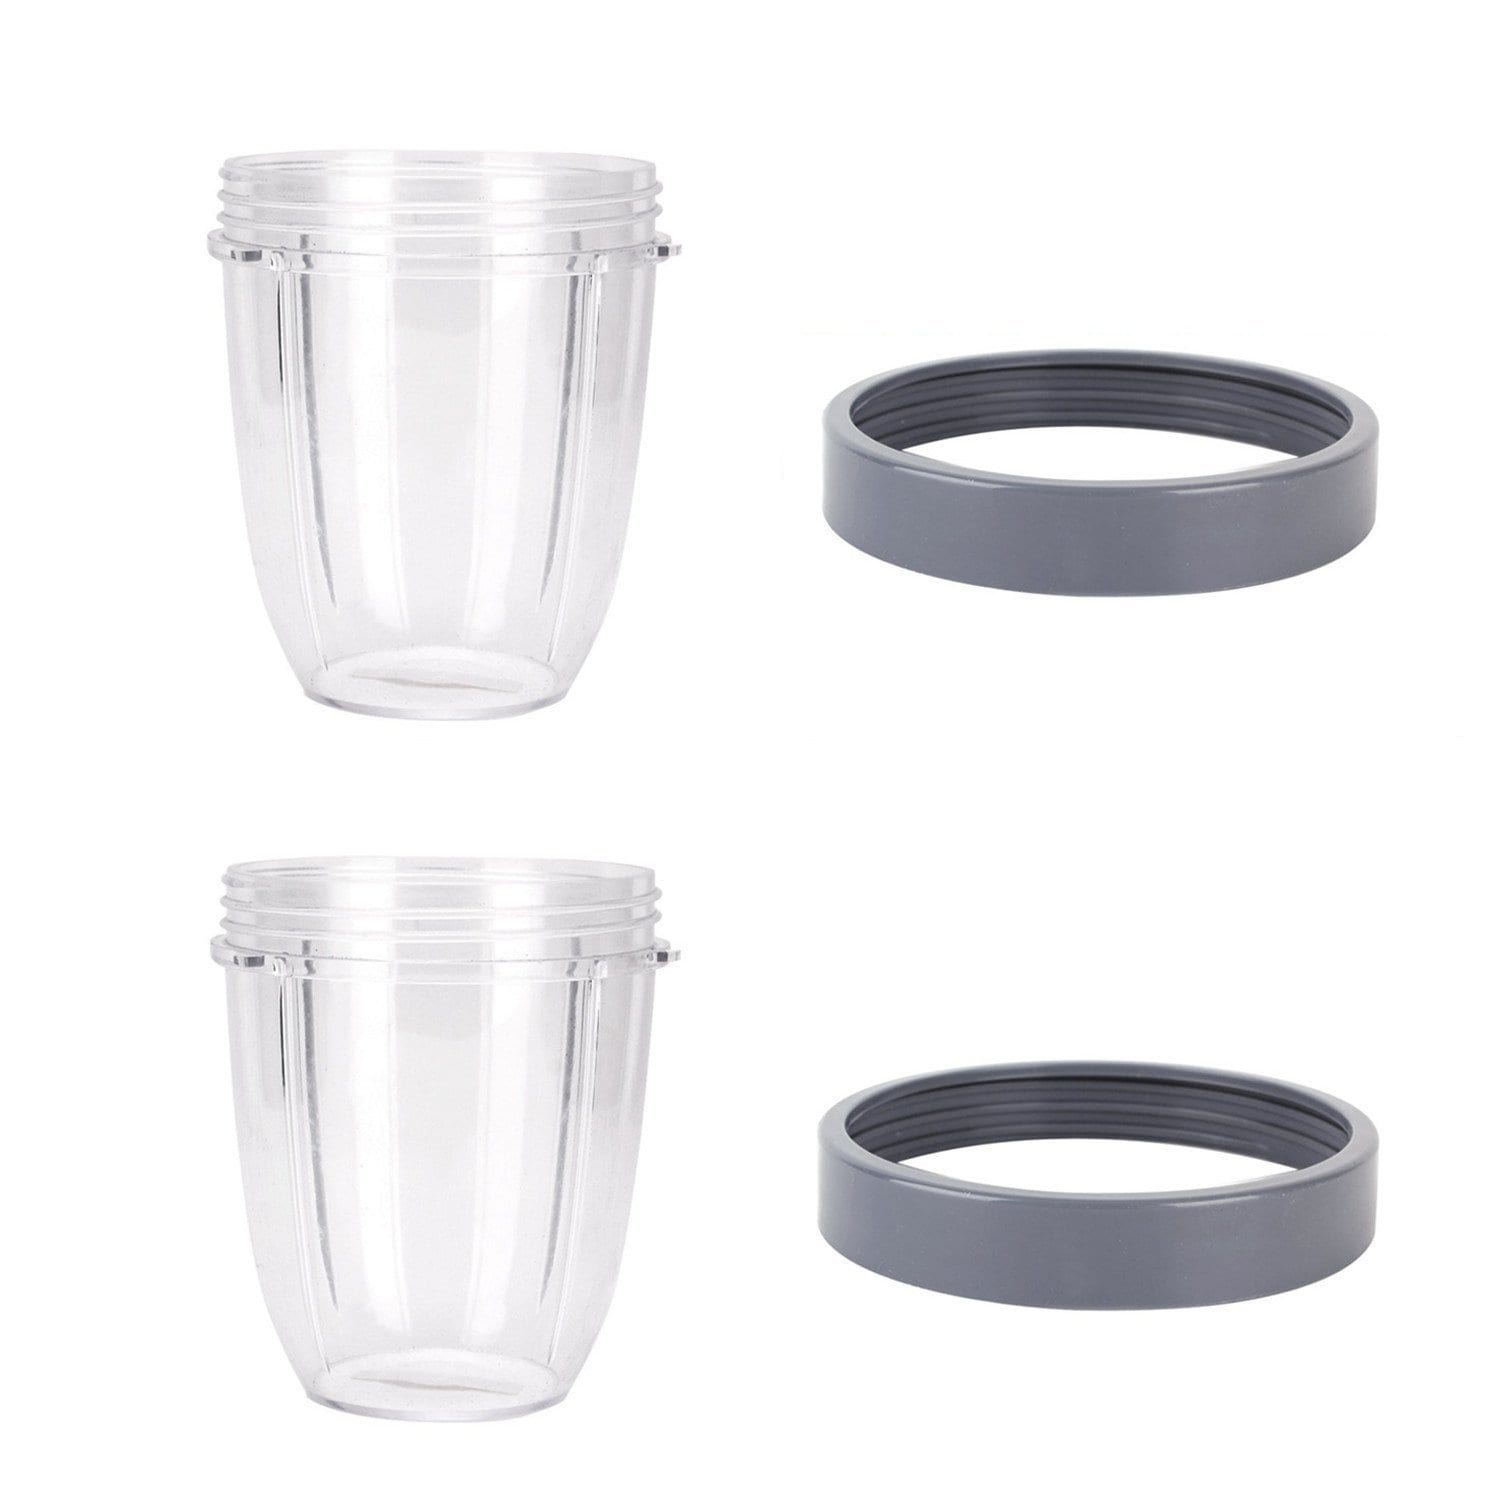  16OZ Replacement Cup and 12OZ Short Cup with Lip Ring